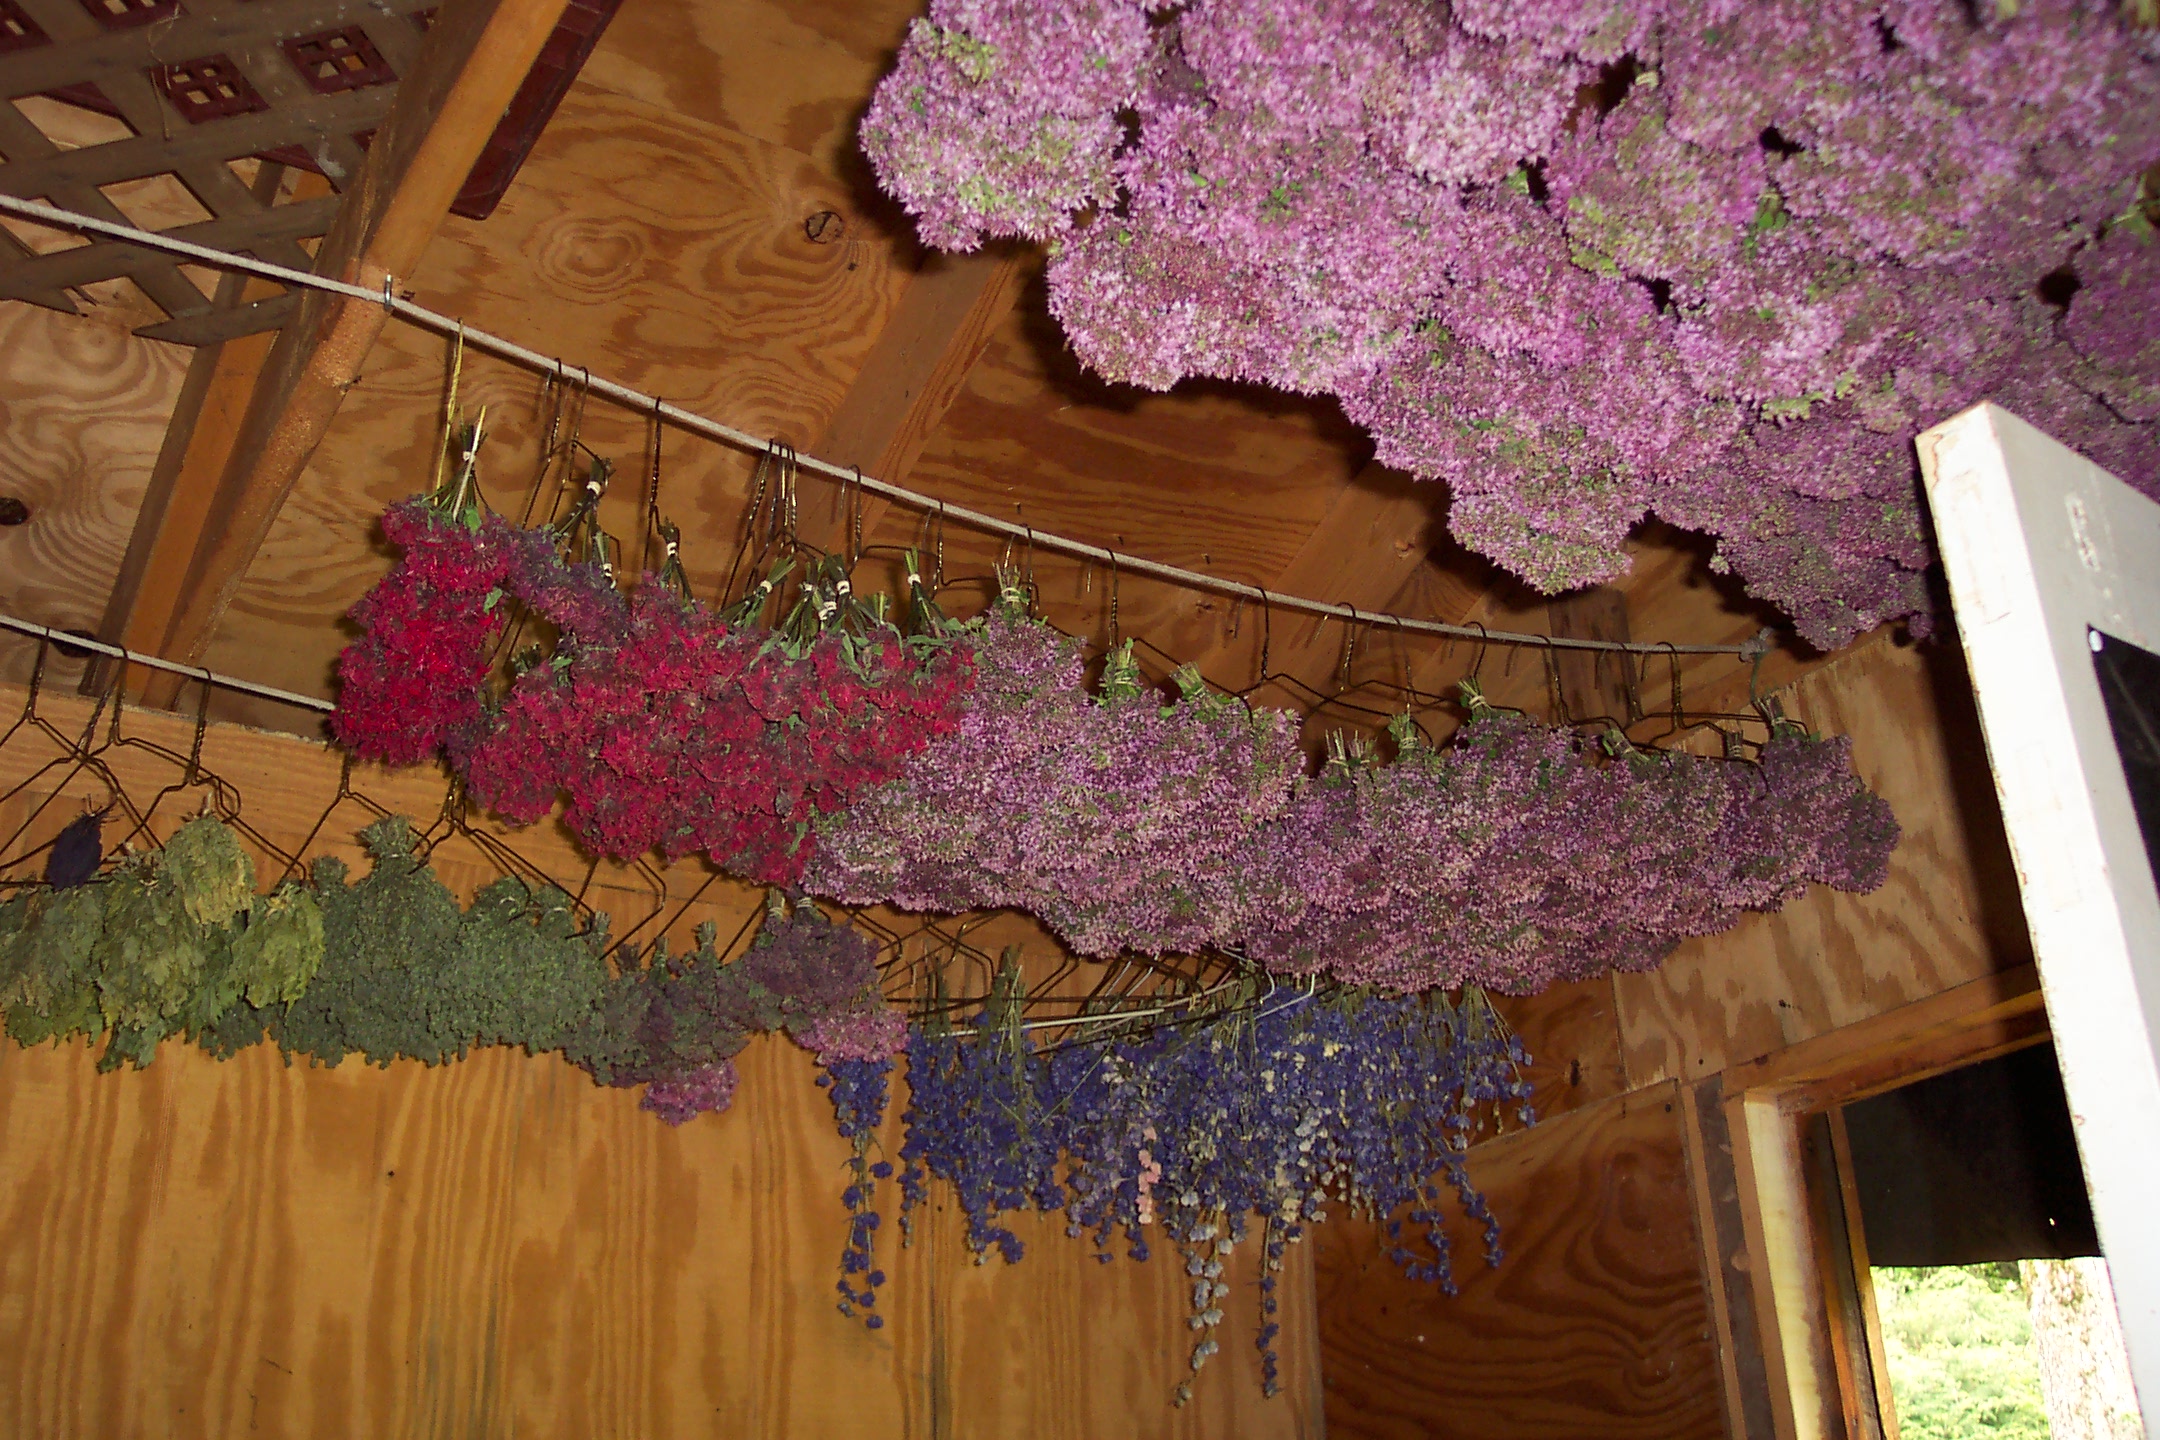 Dried flowers hanging in a wooden indoor space.